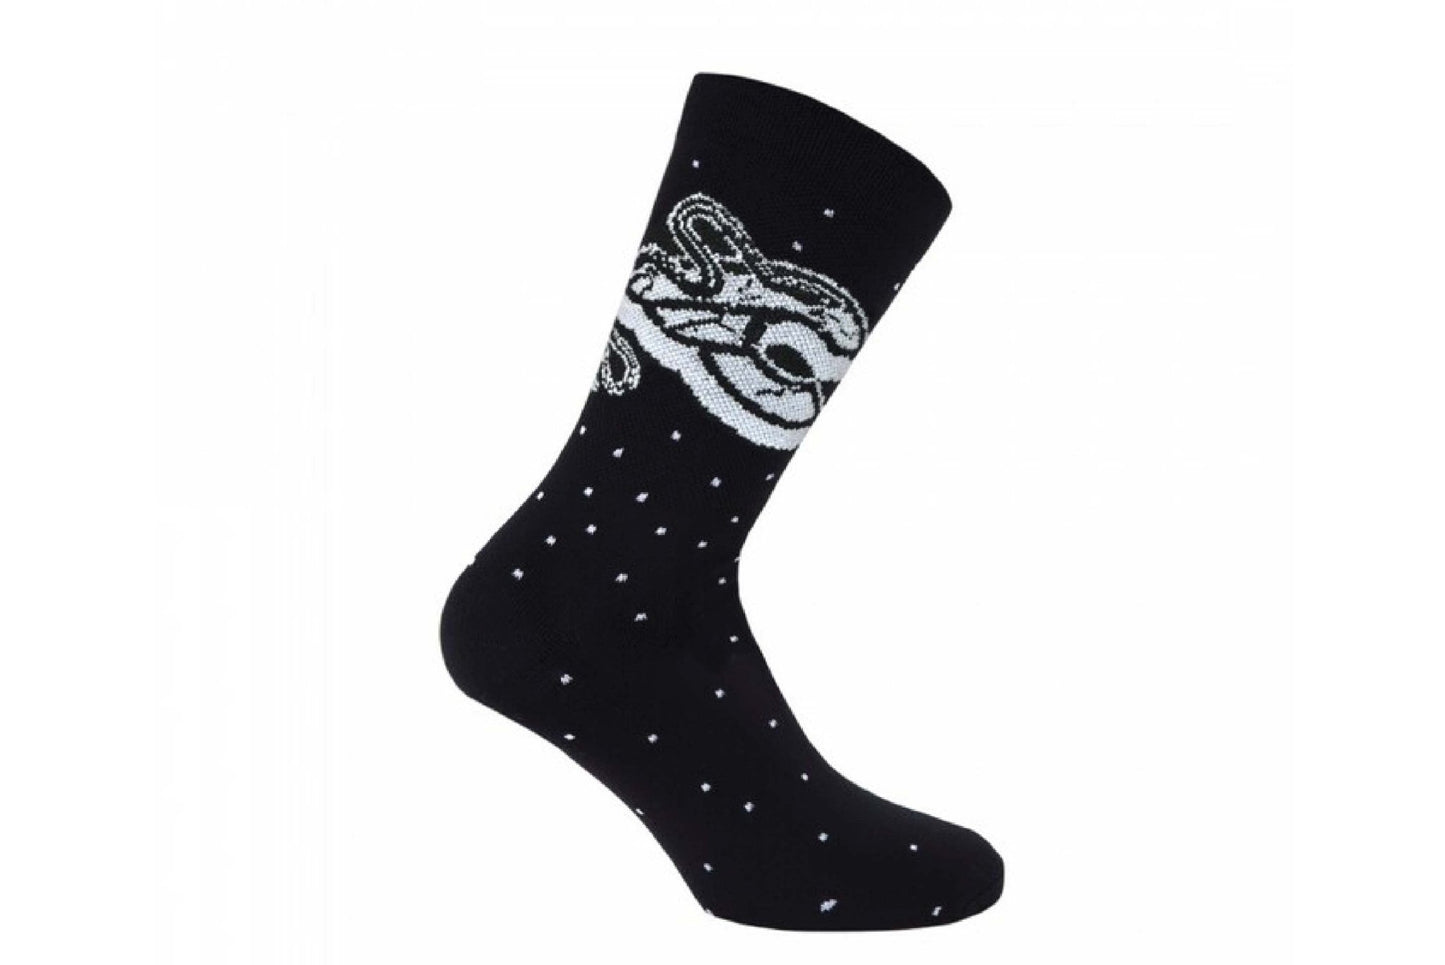 FISHTAIL CYCLERY - CINELLI Mike Giant Black Socks - FISHTAIL CYCLERY